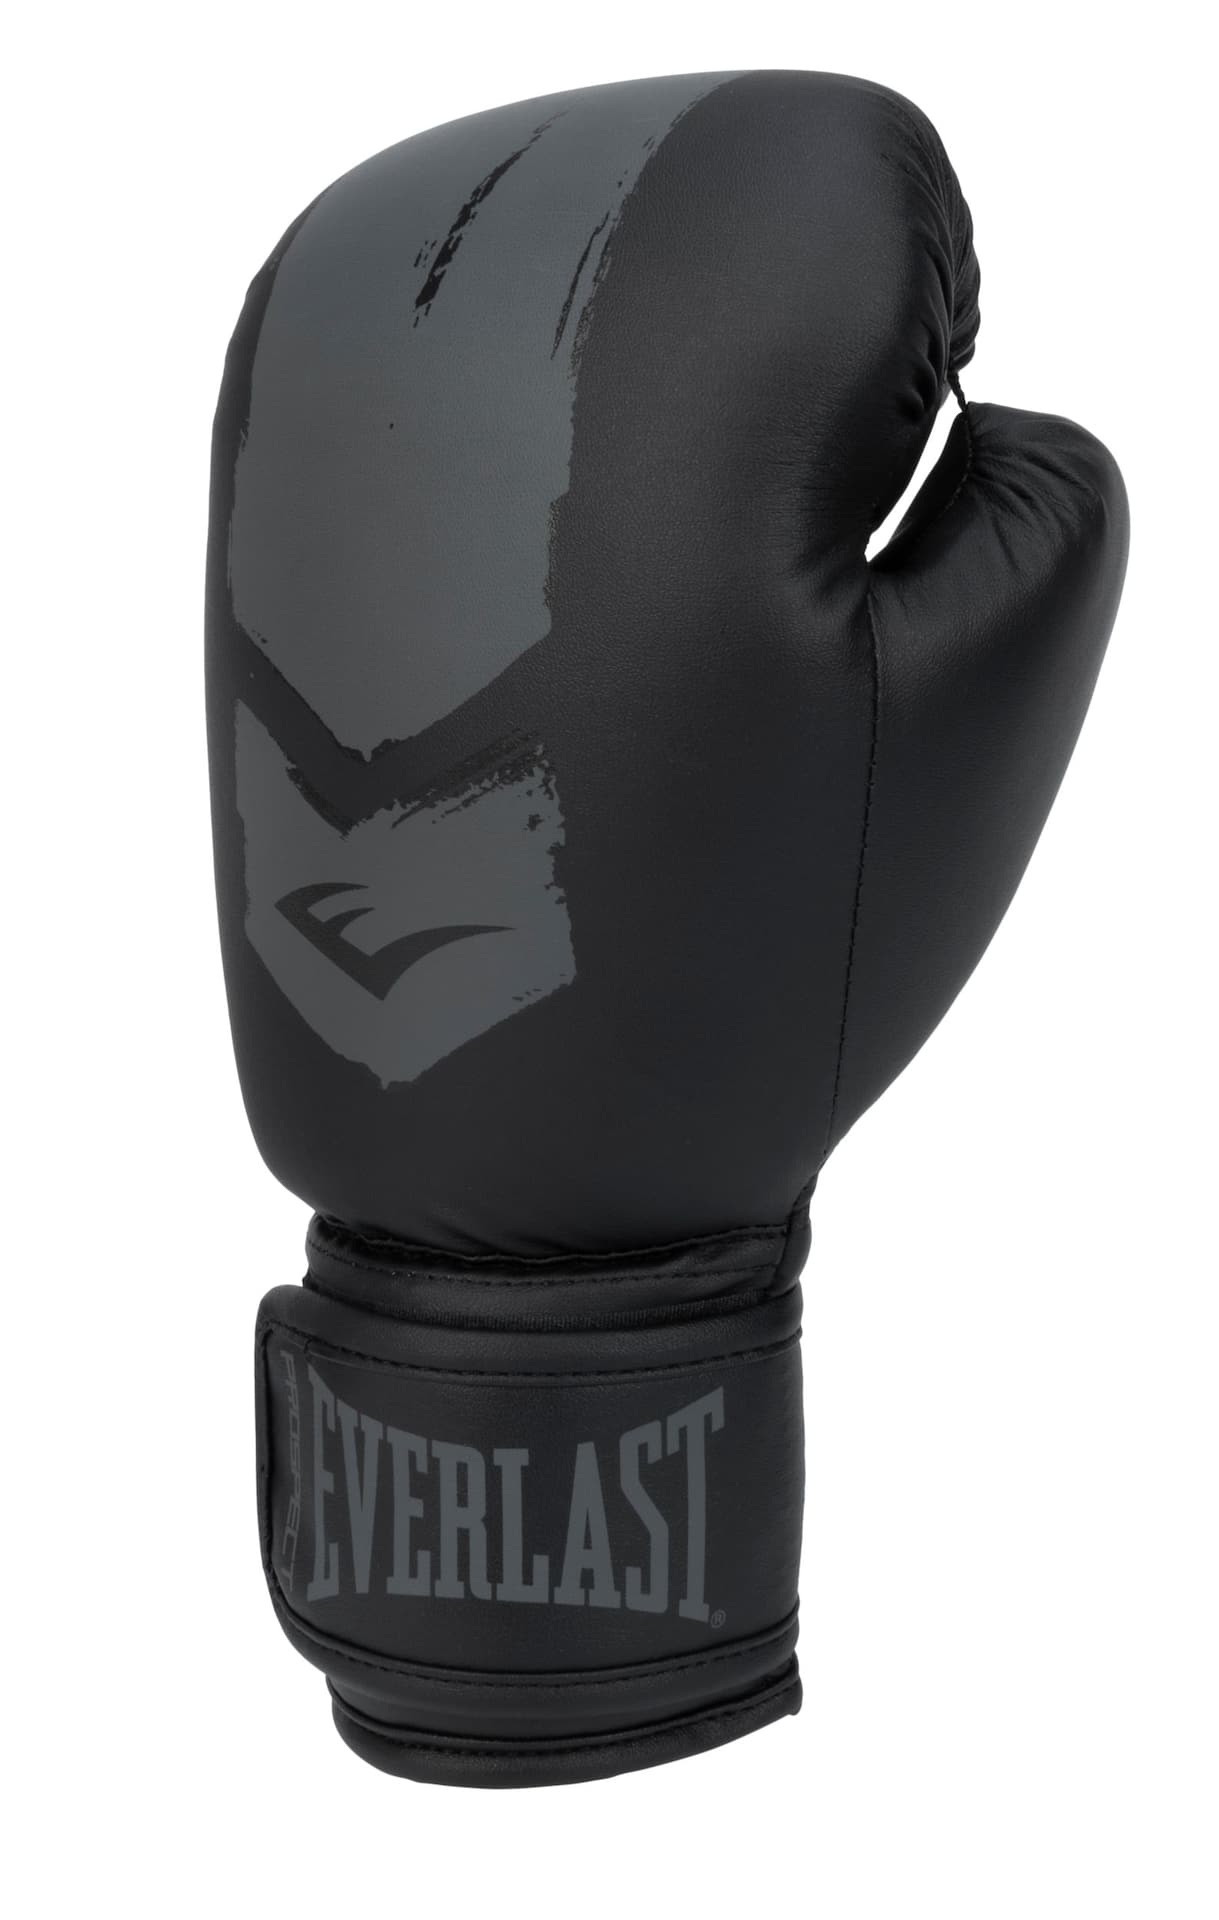 Everlast Boxing Gloves, Youth, 8-oz